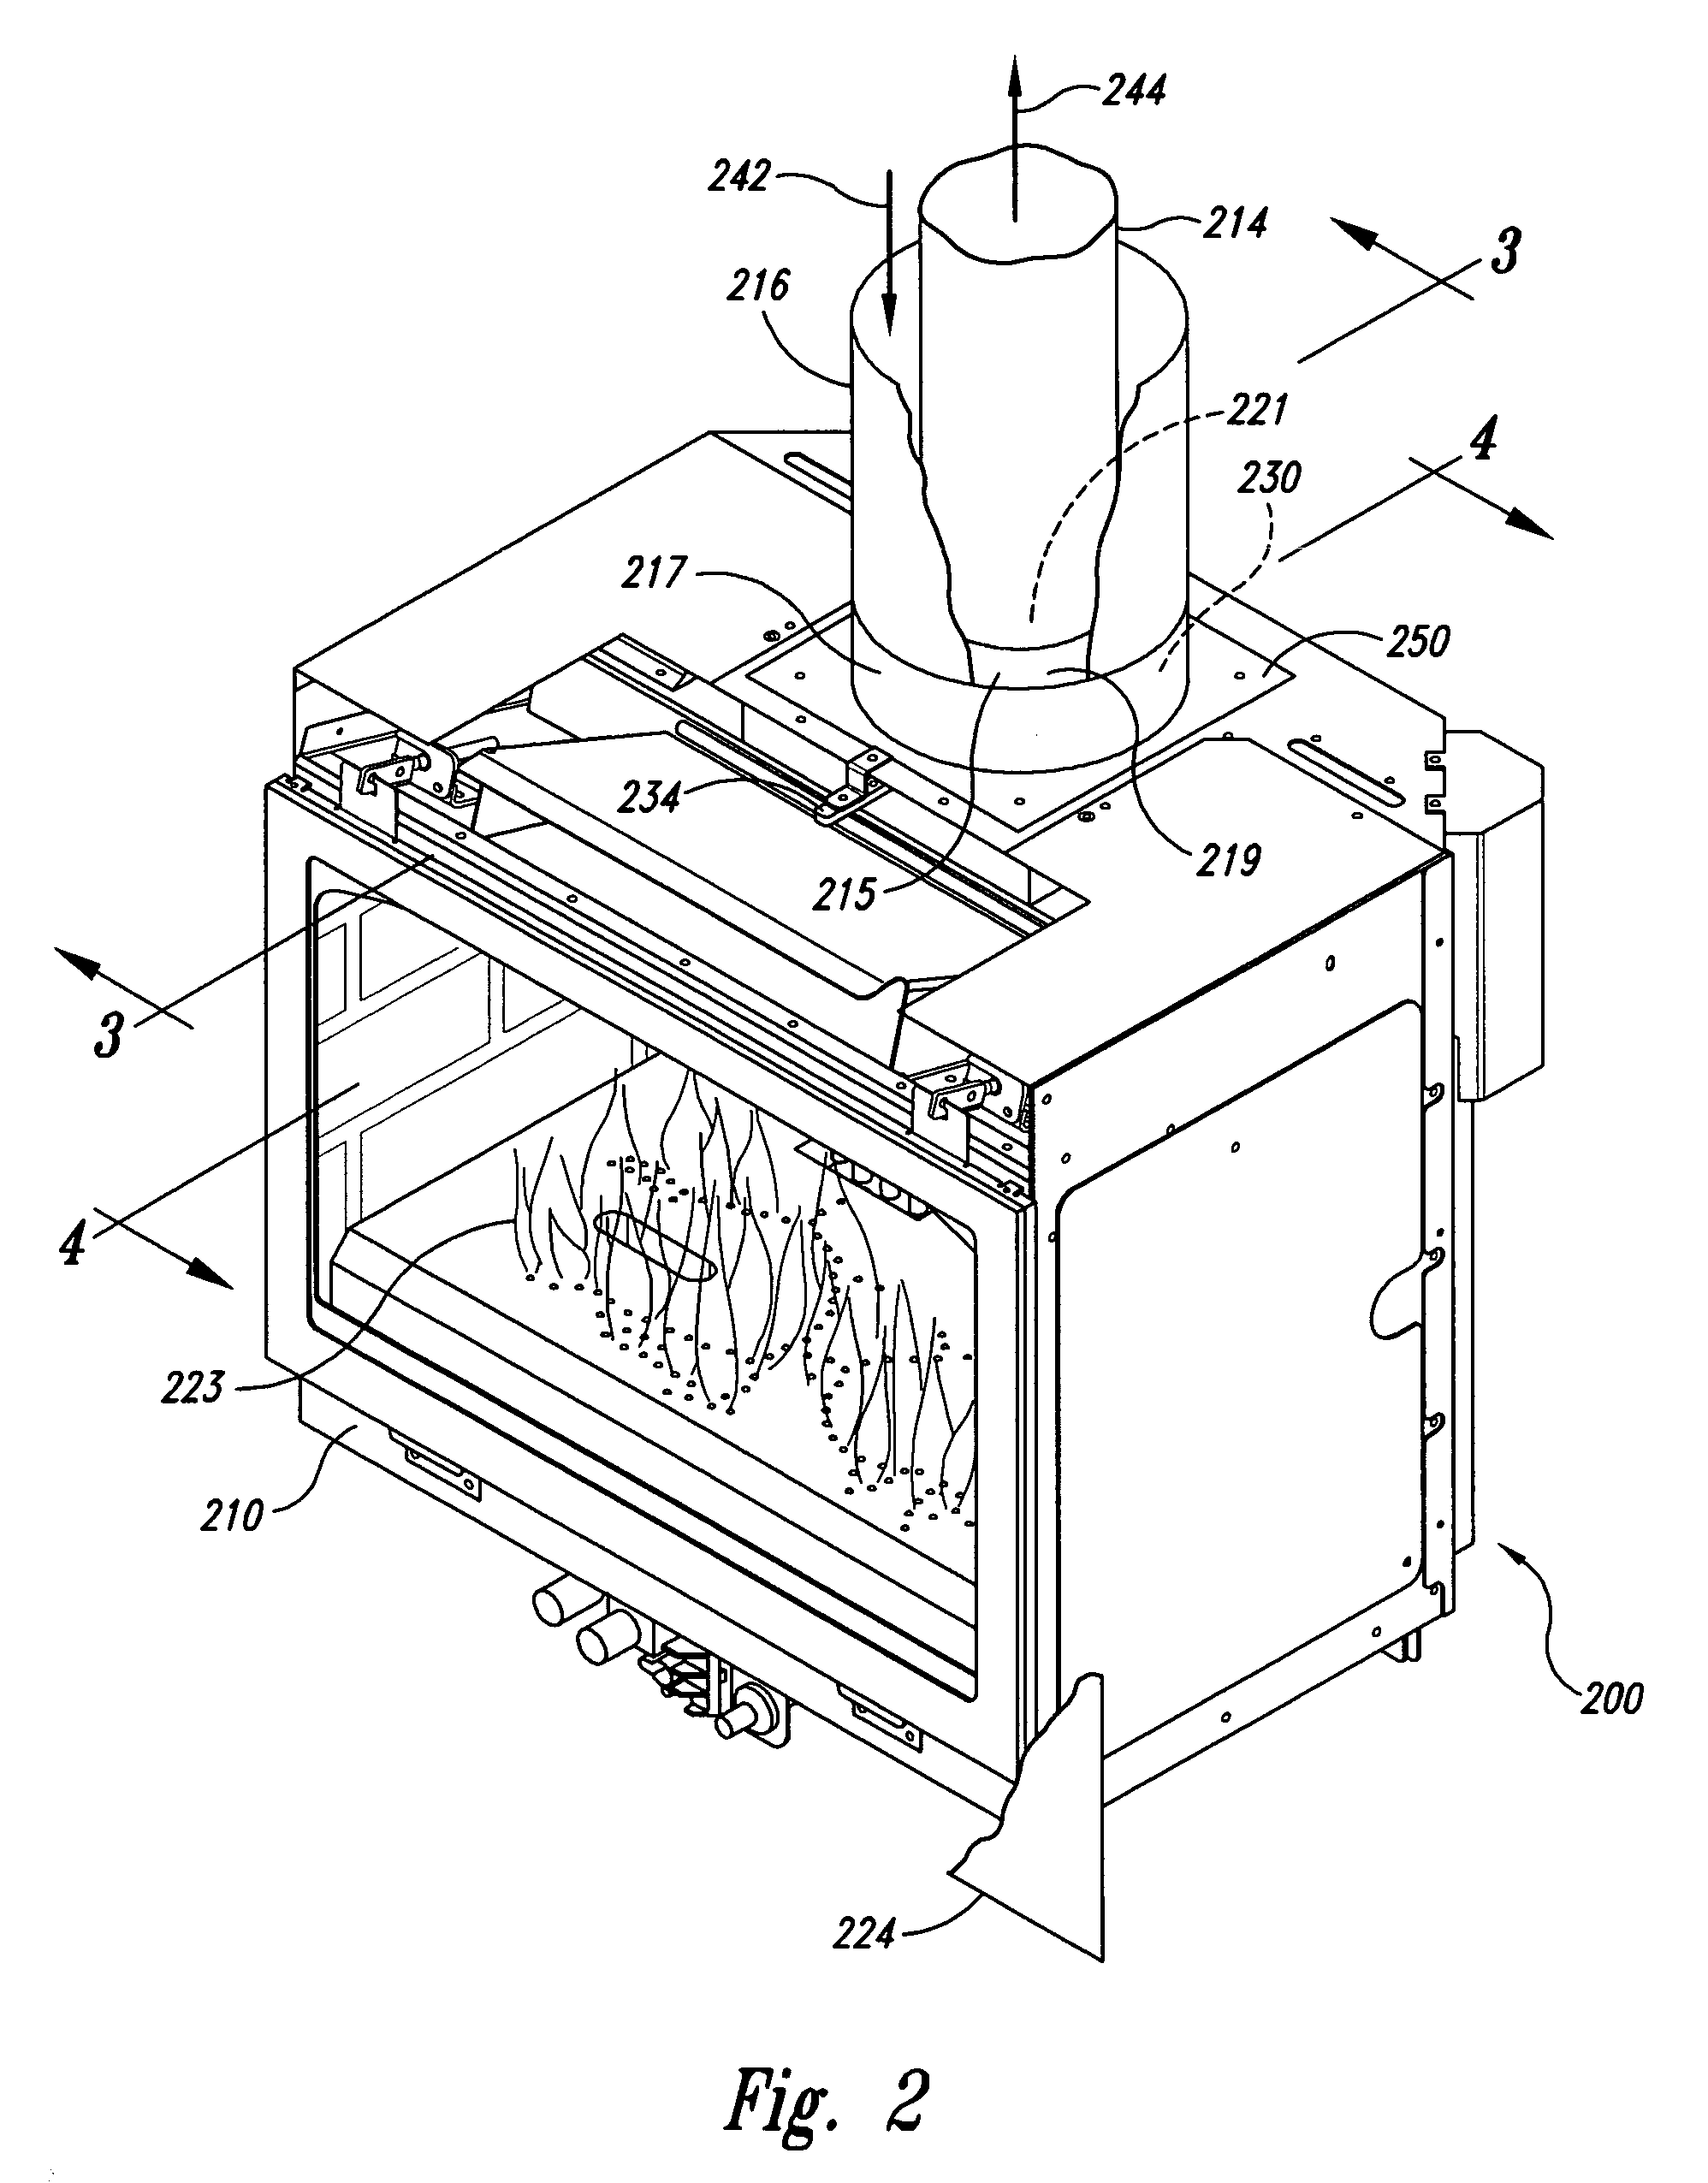 Apparatuses and methods for balancing combustion air and exhaust gas for use with a direct-vent heater appliance